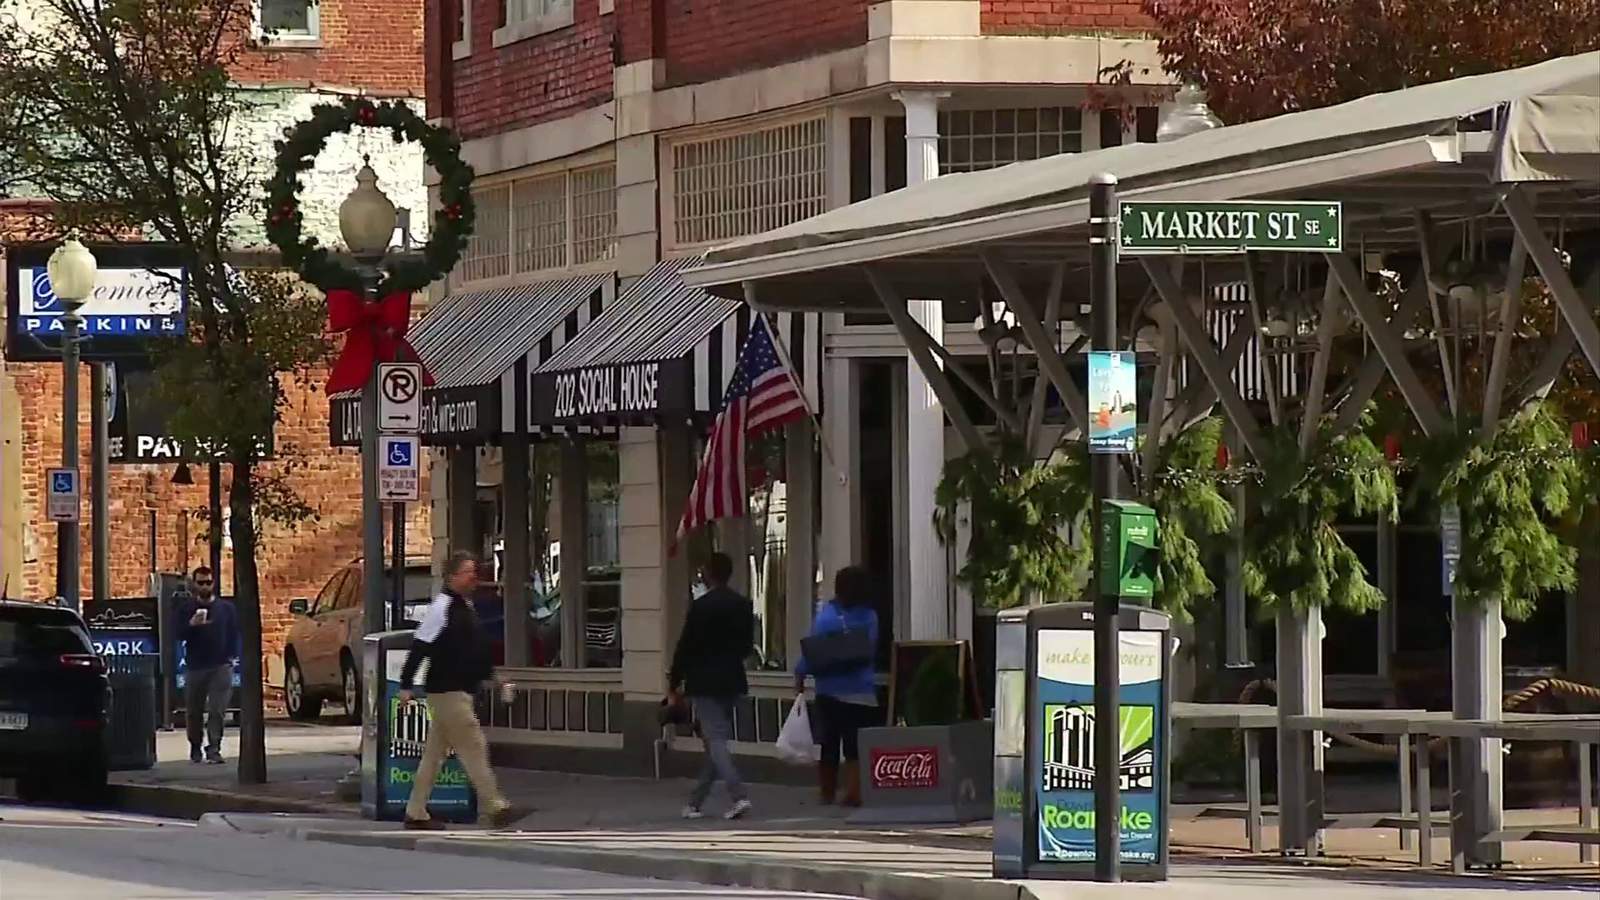 Free holiday parking returns to downtown Roanoke on Wednesday